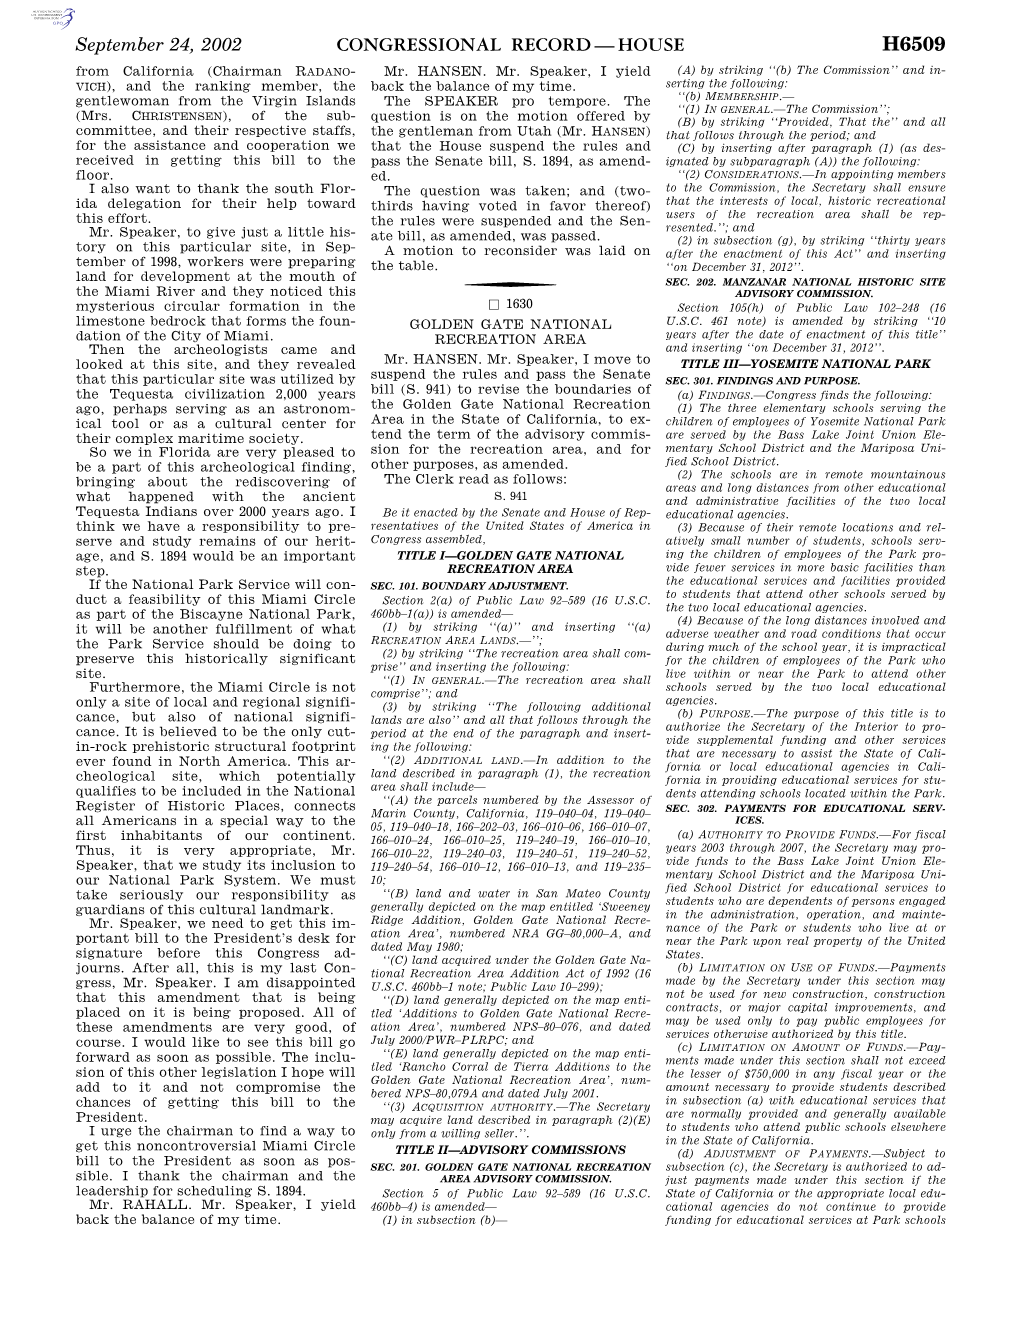 Congressional Record—House H6509